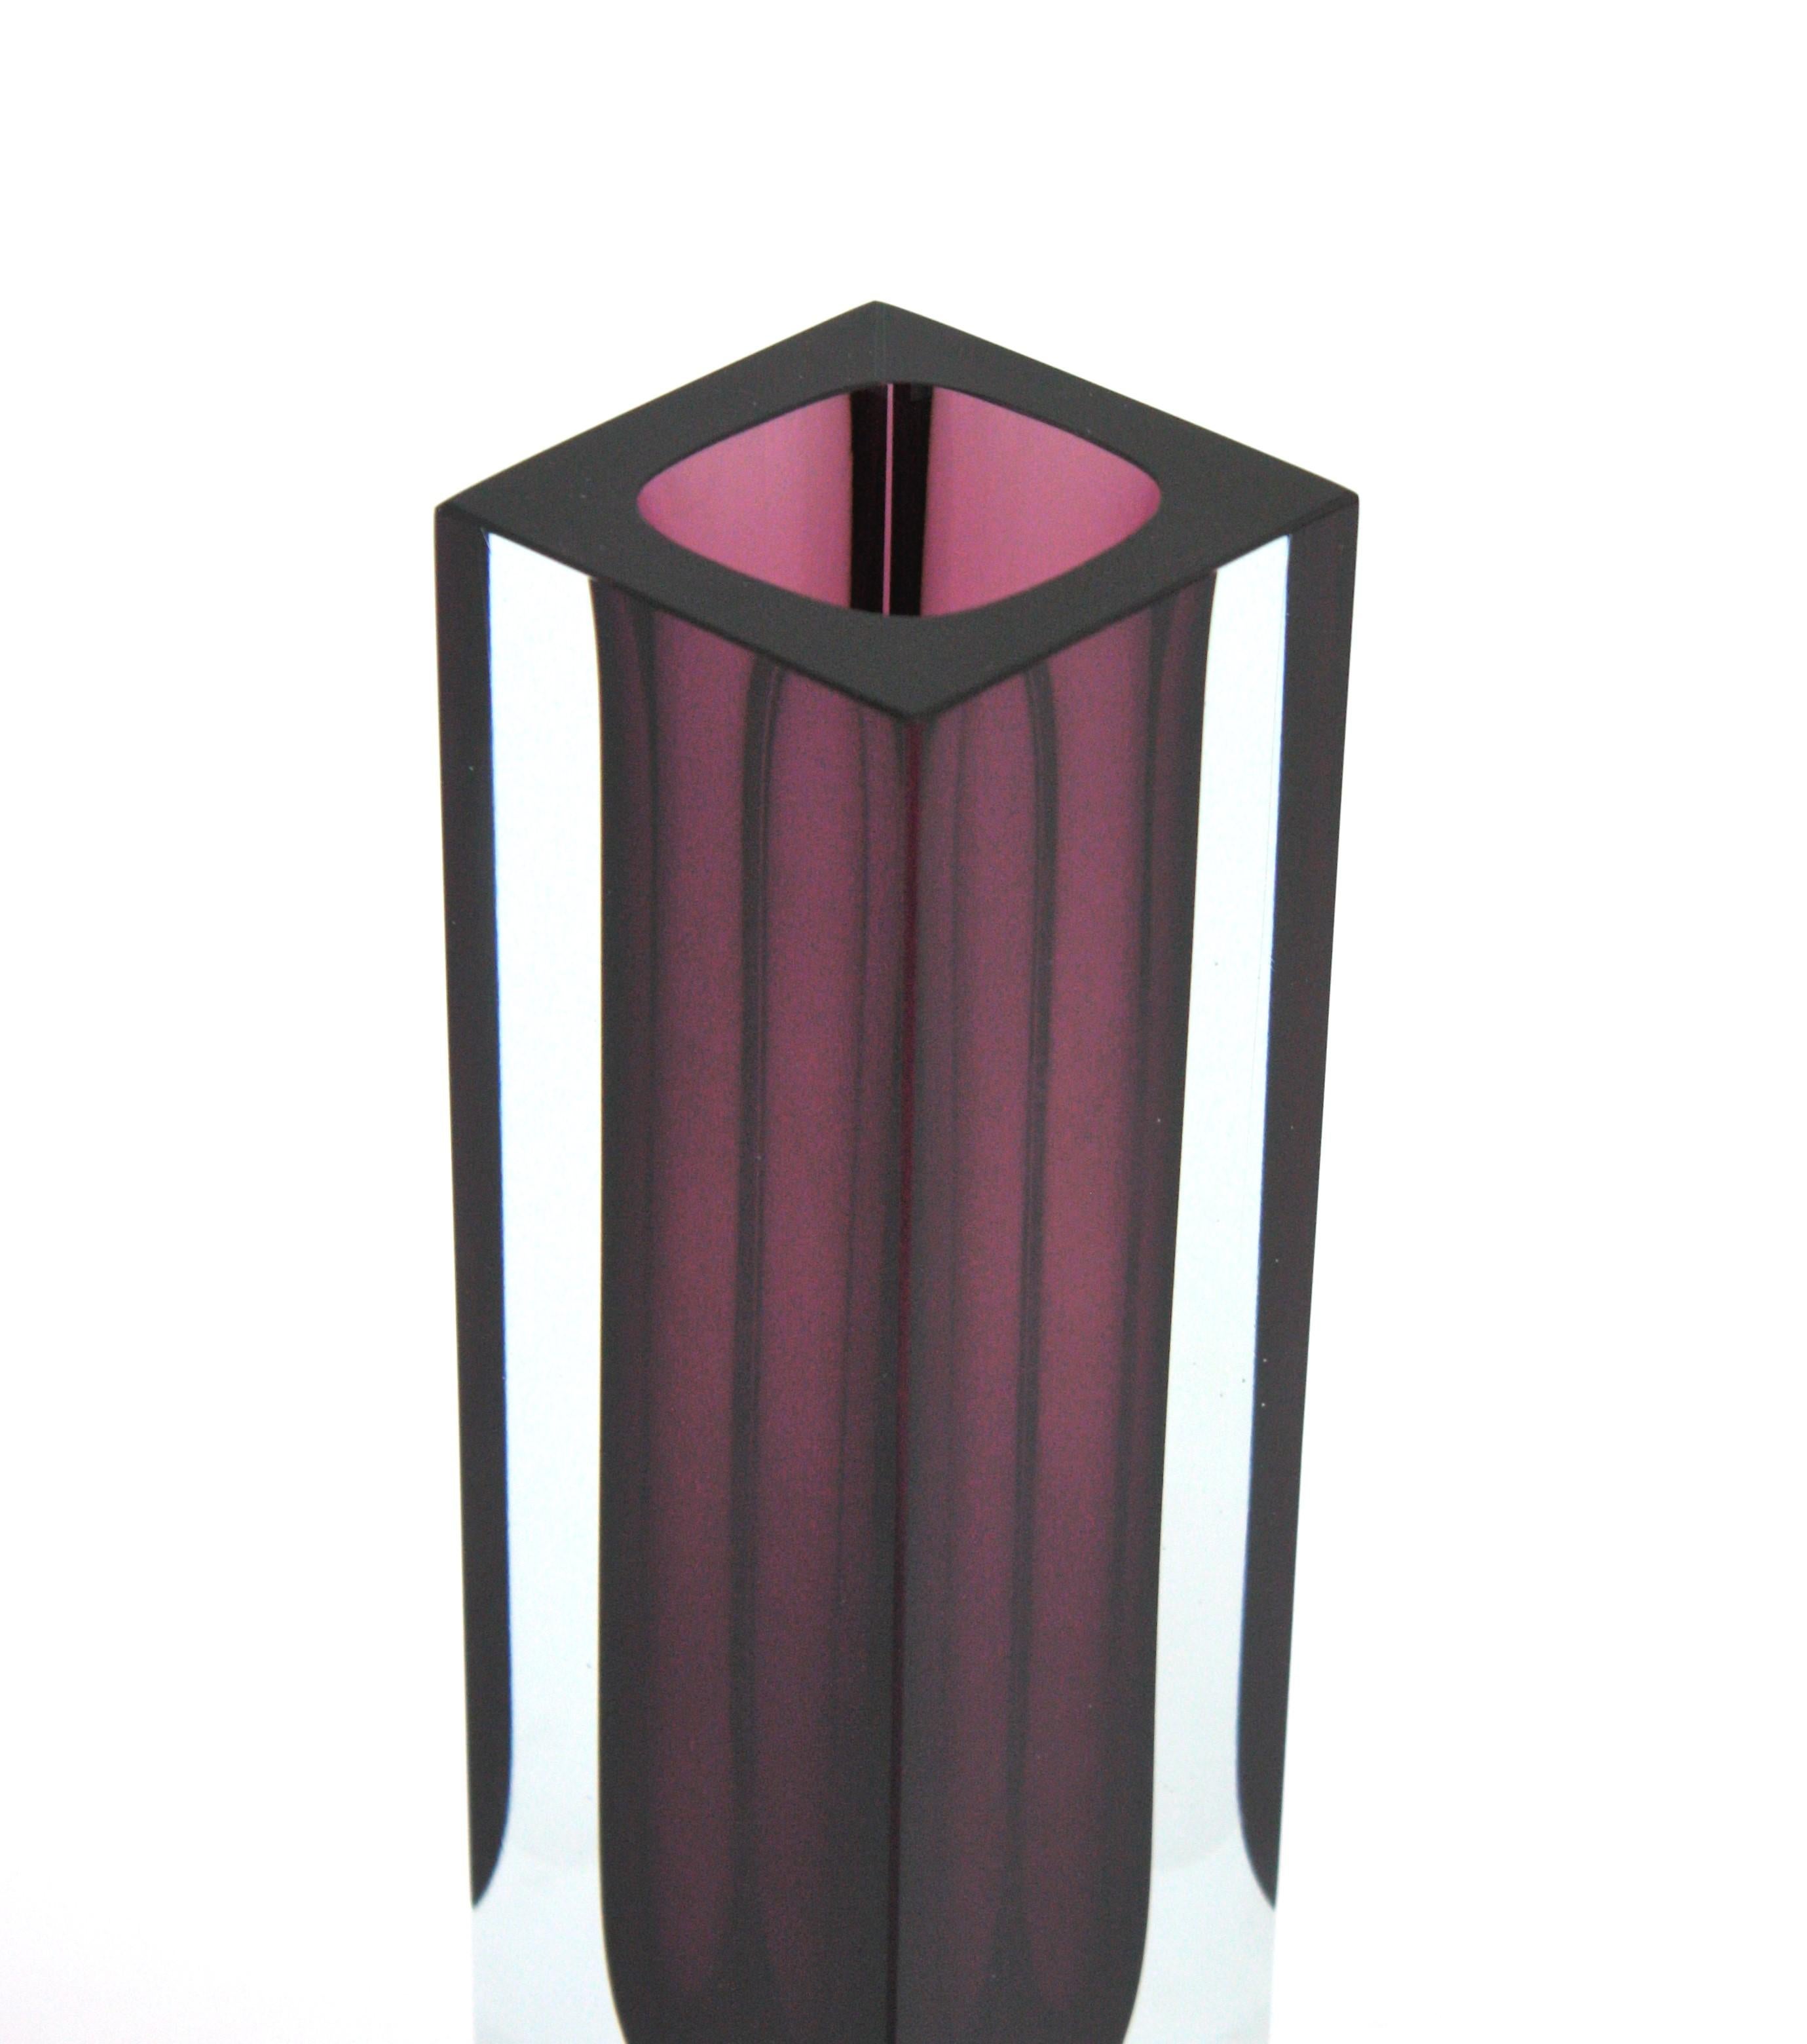 Giant Flavio Poli Murano Sommerso Purple Clear Faceted Art Glass Vase For Sale 5